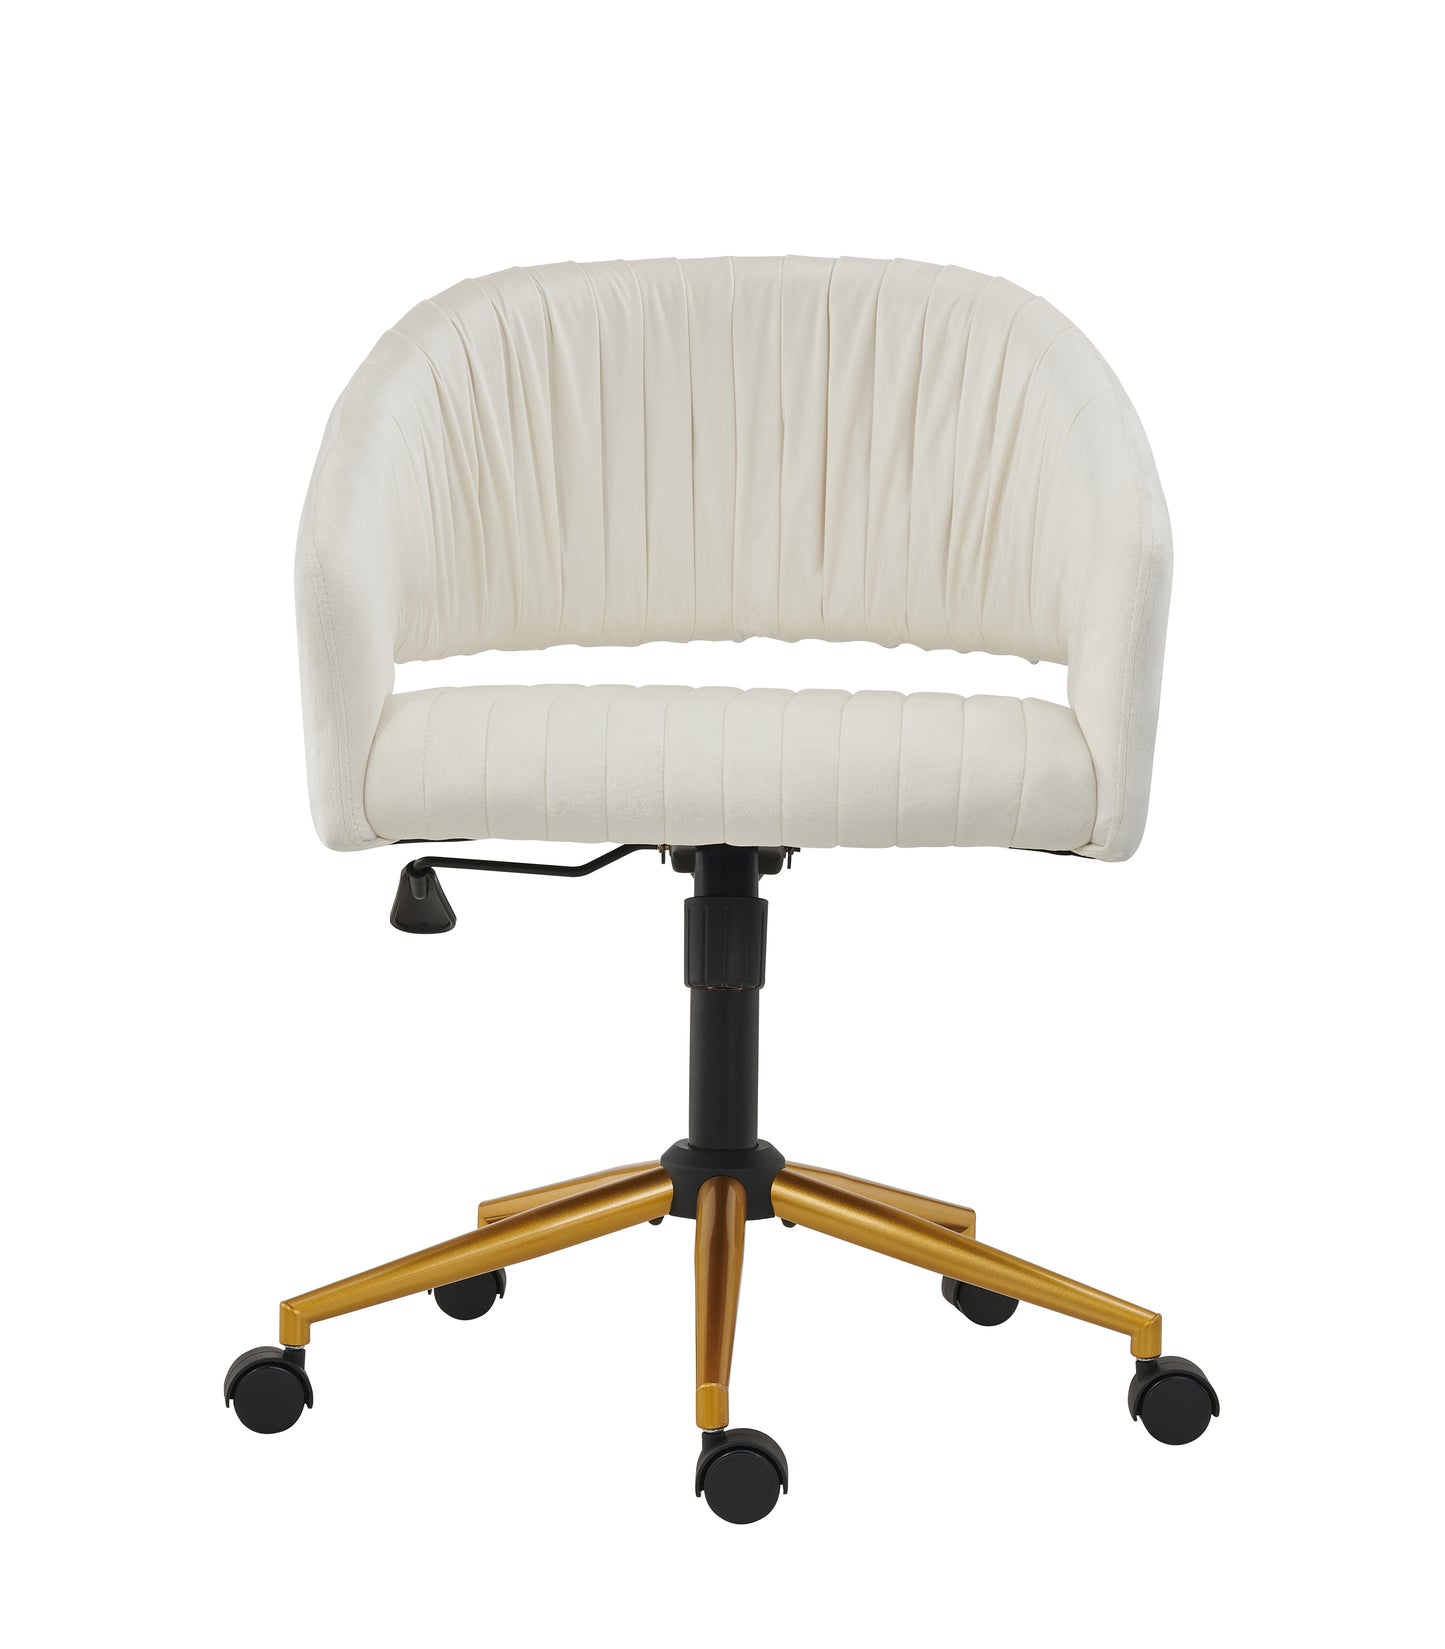 Modern swivel high quality velvet office desk chair white color in gold metal luxury height adjustable computer chair living room chair